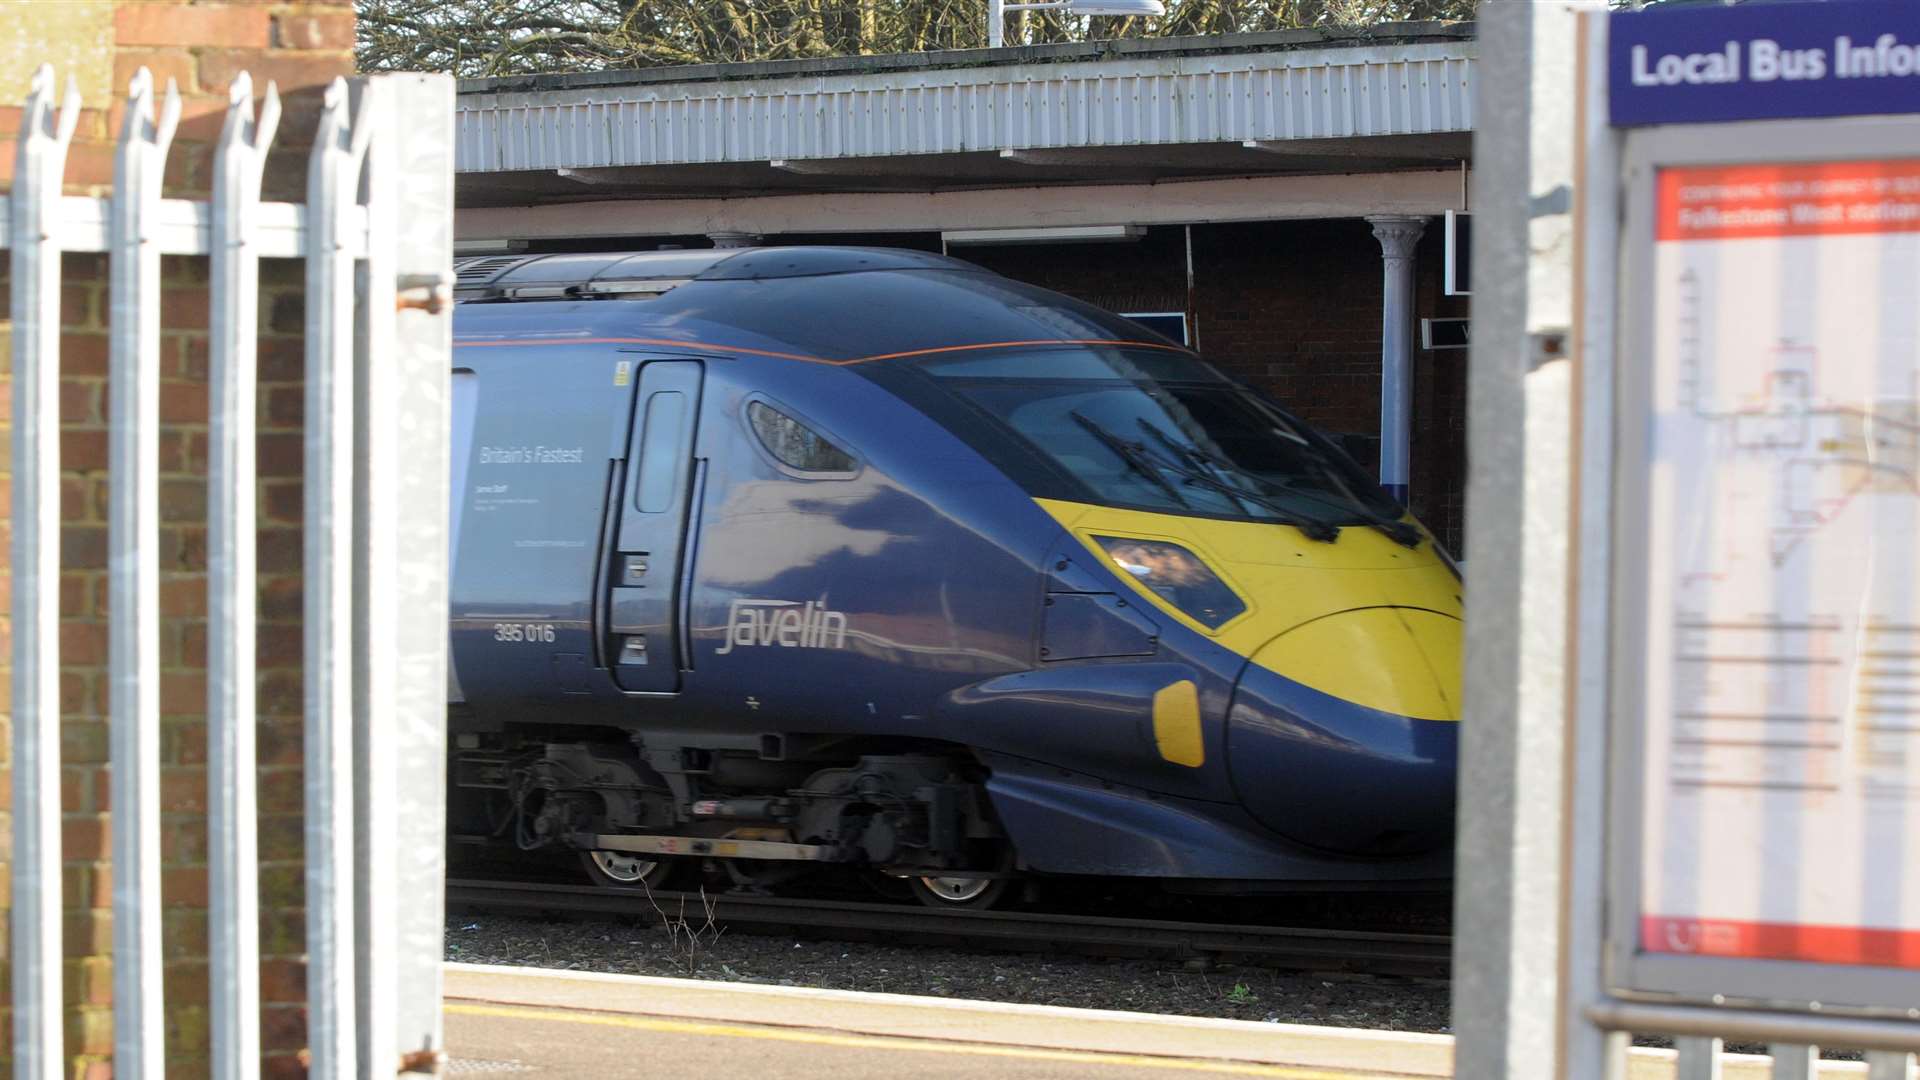 The High Speed train arriving at Folkestone West station